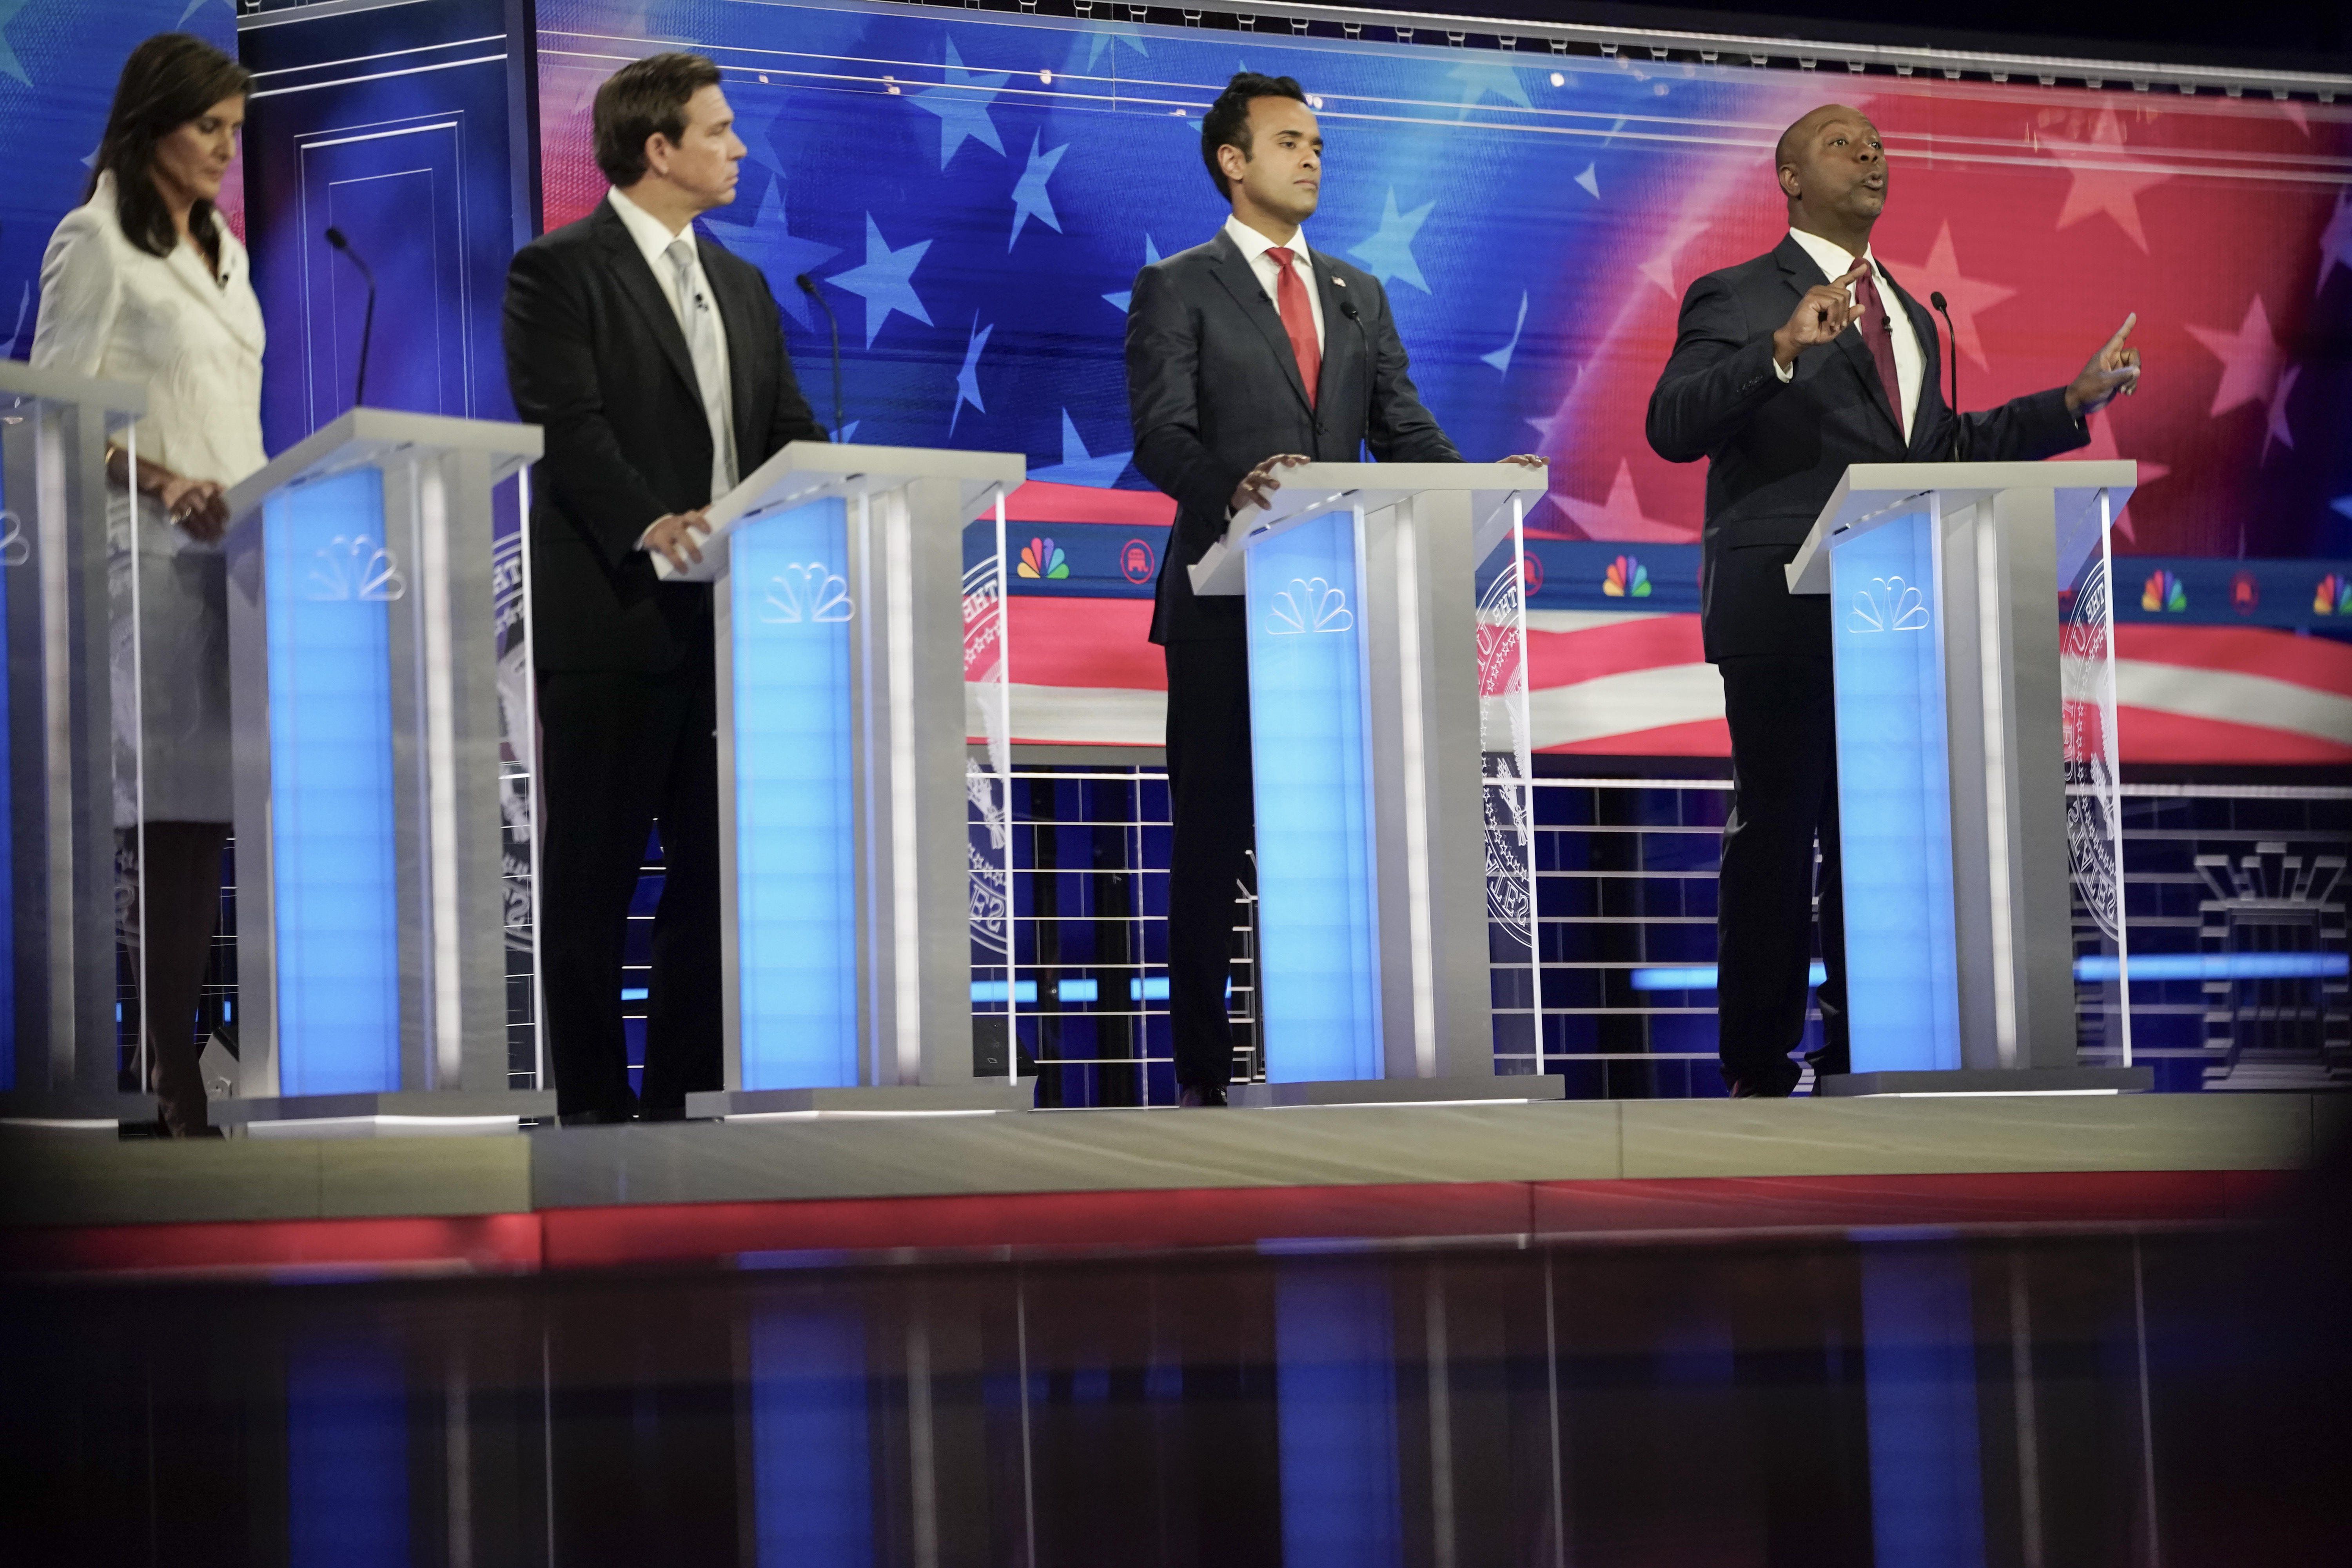 Republican candidates line the Miami stage for Wednesday's GOP debate.